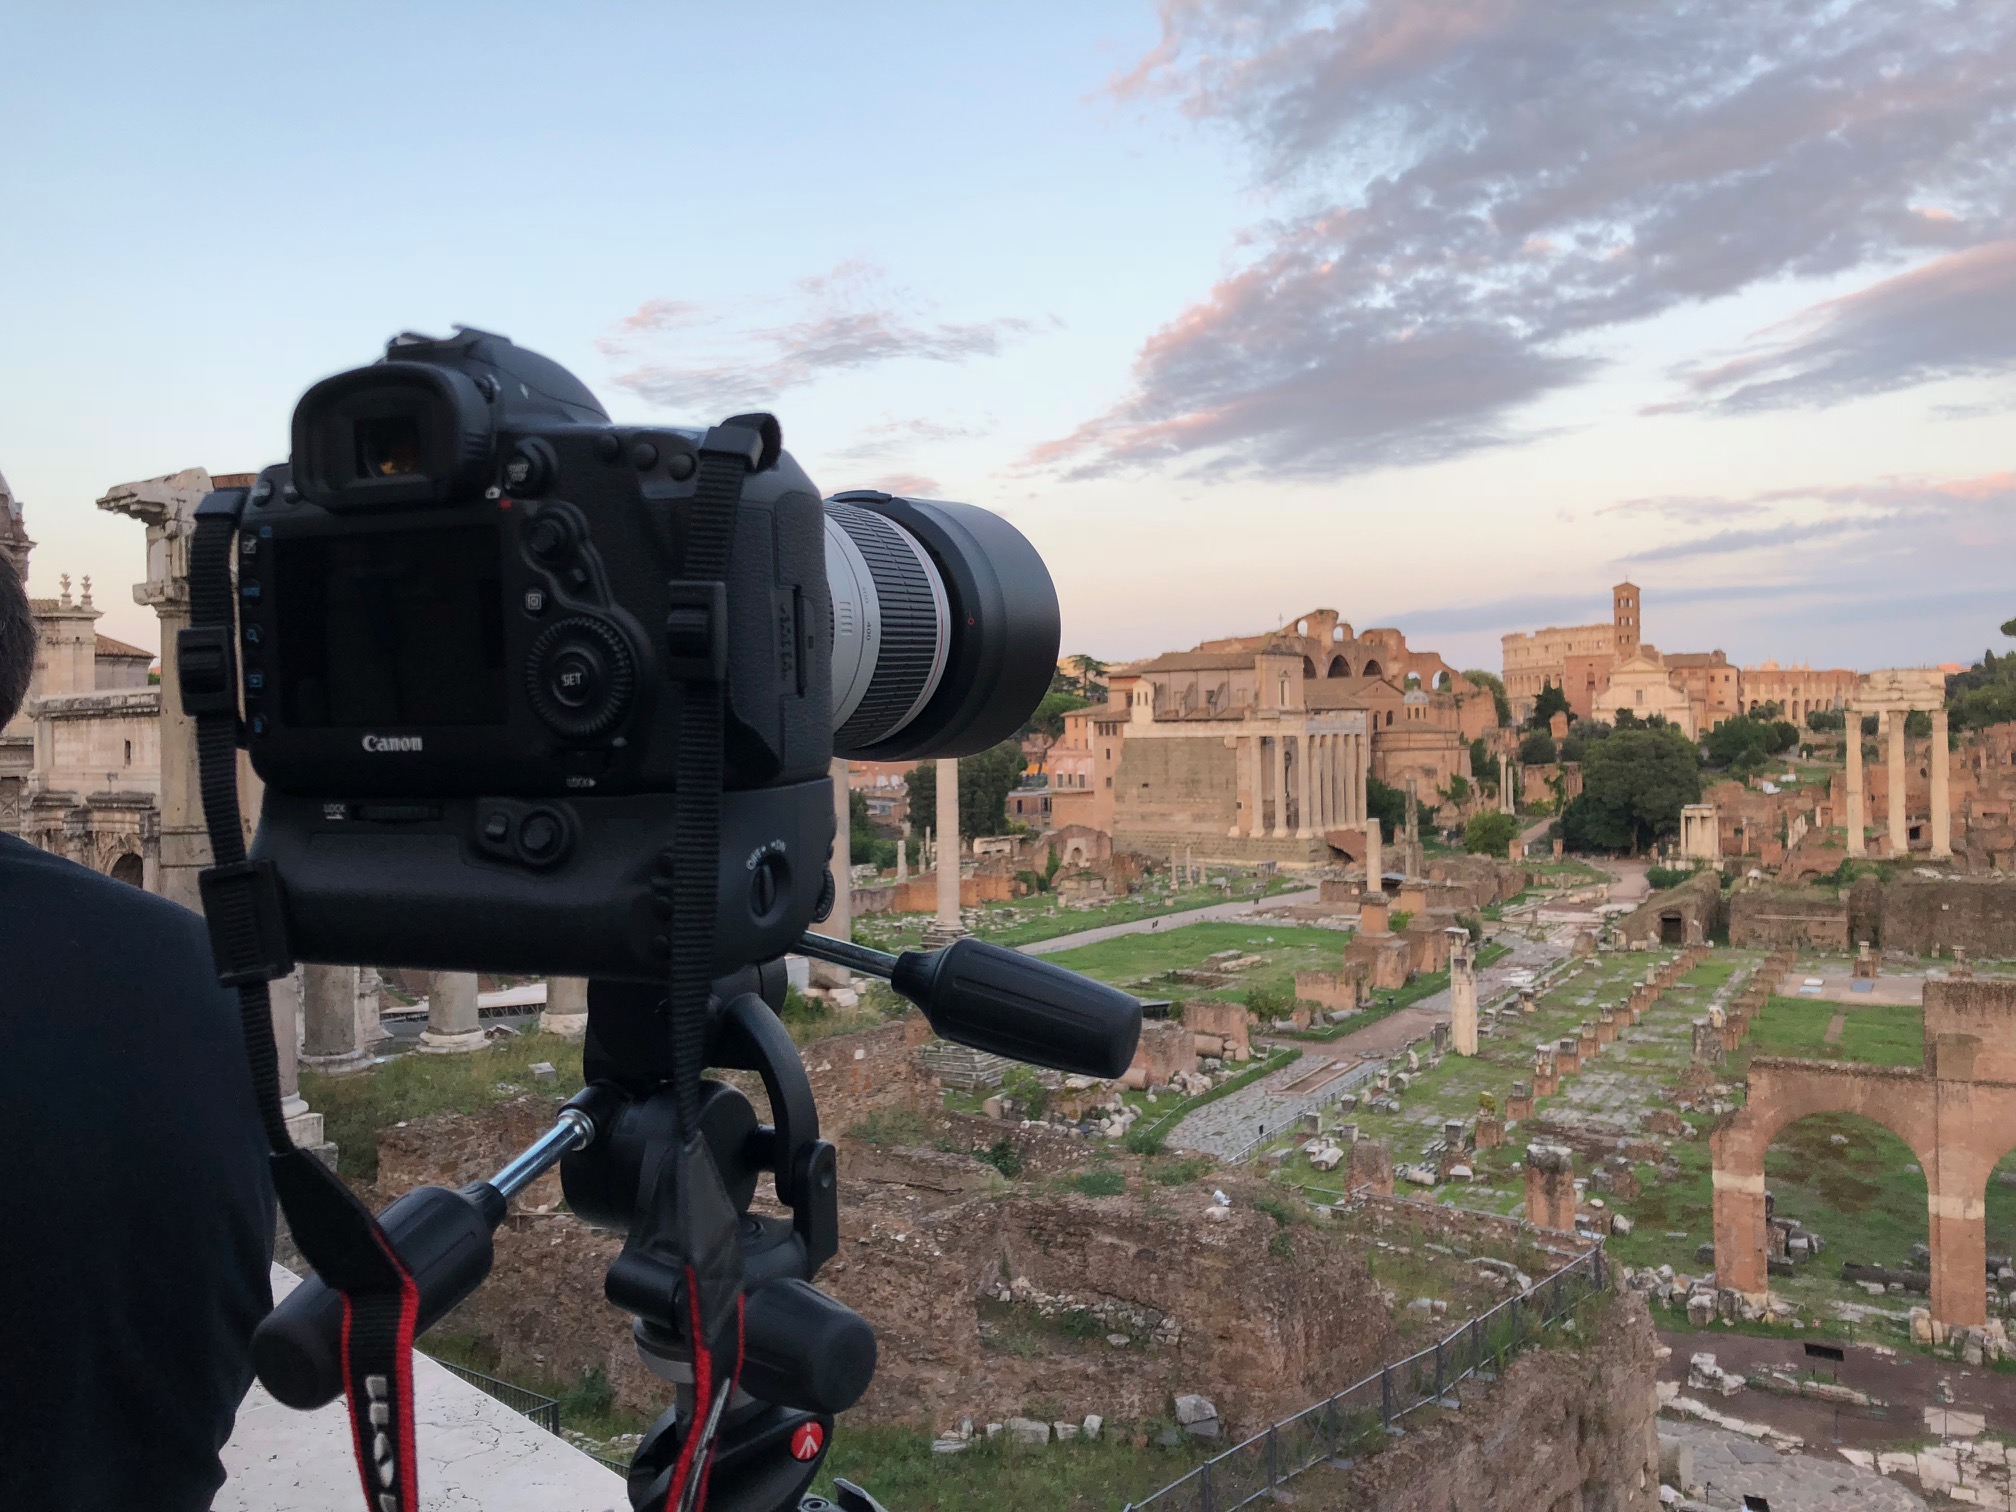 Setup ready to go! On the background, the Roman Forum and the Colosseum